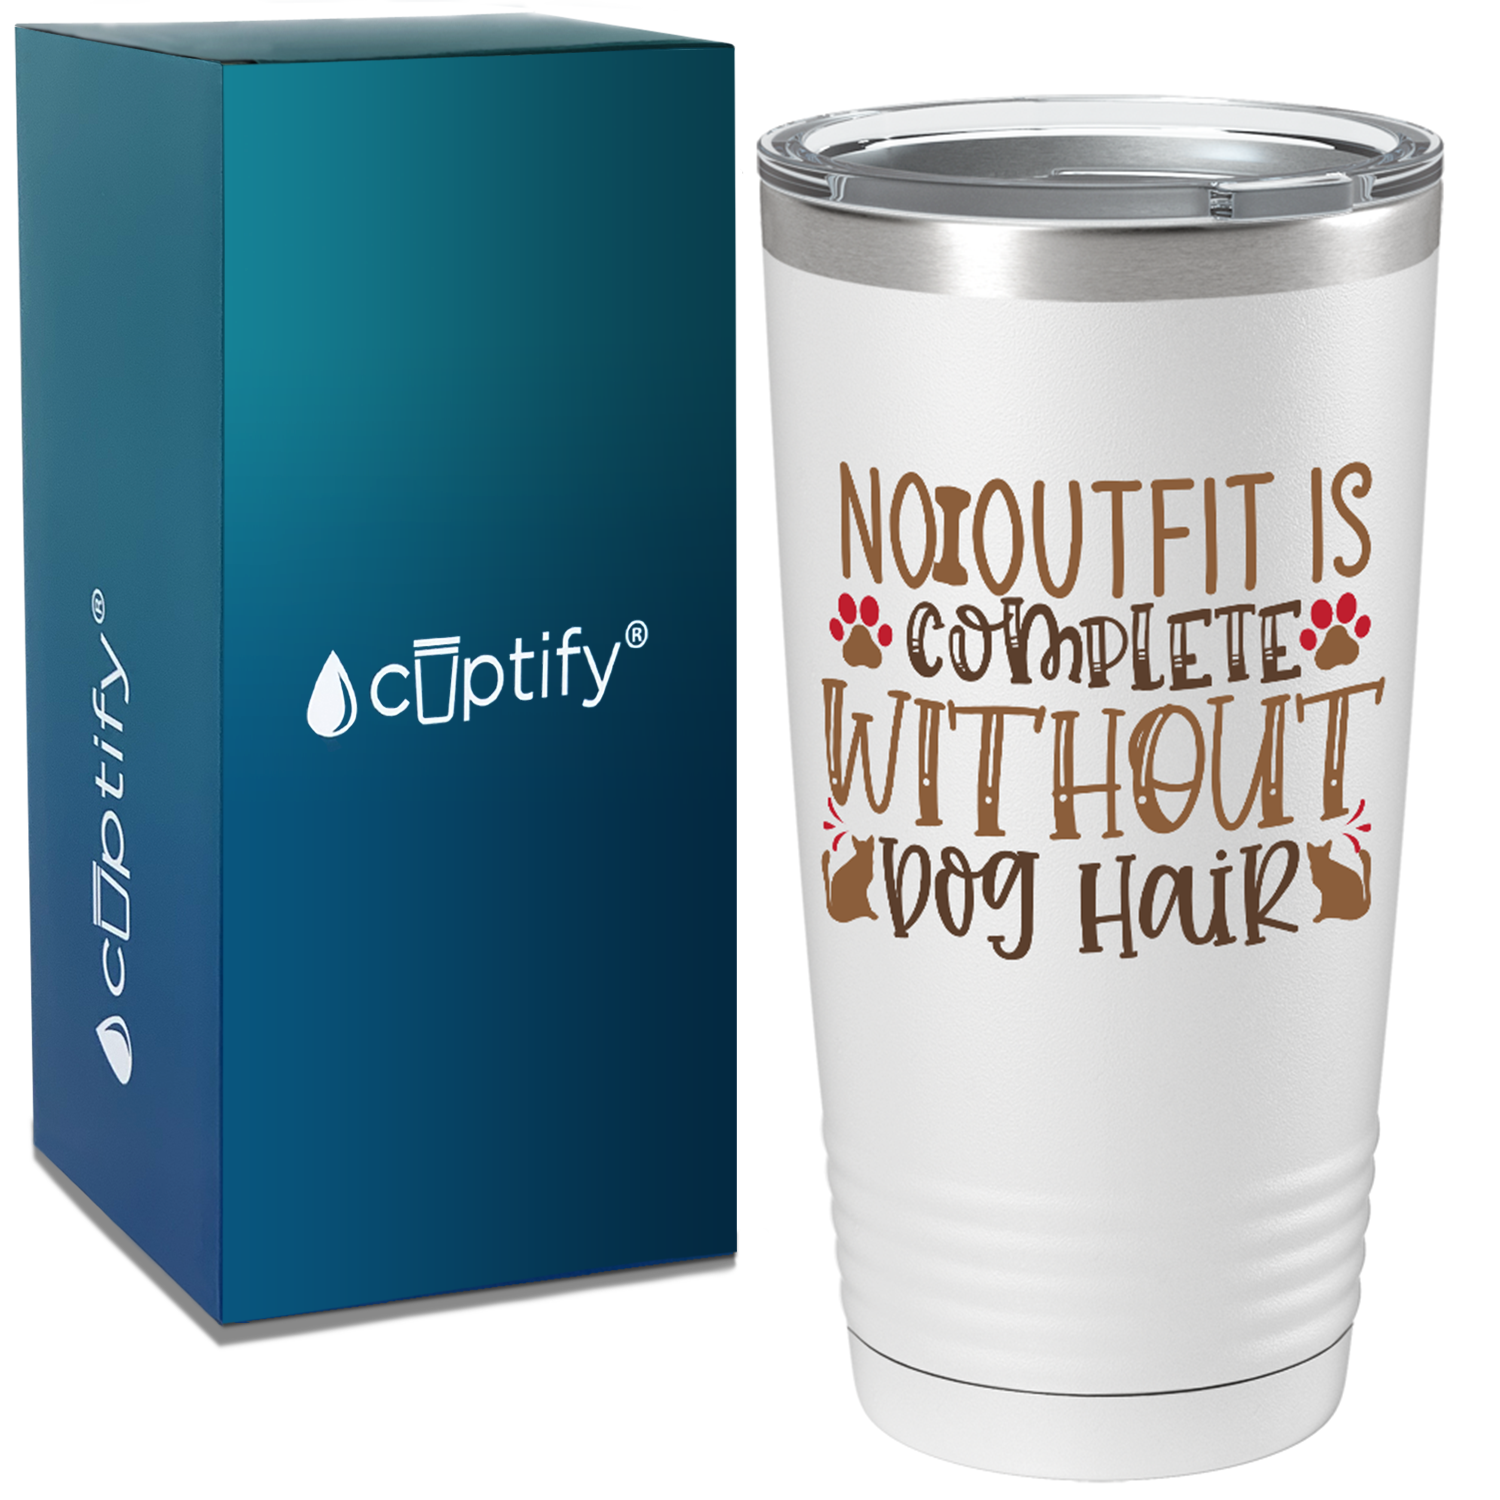 No Outfit Is Complete Without Dog Hair on Dogs 20oz Tumbler